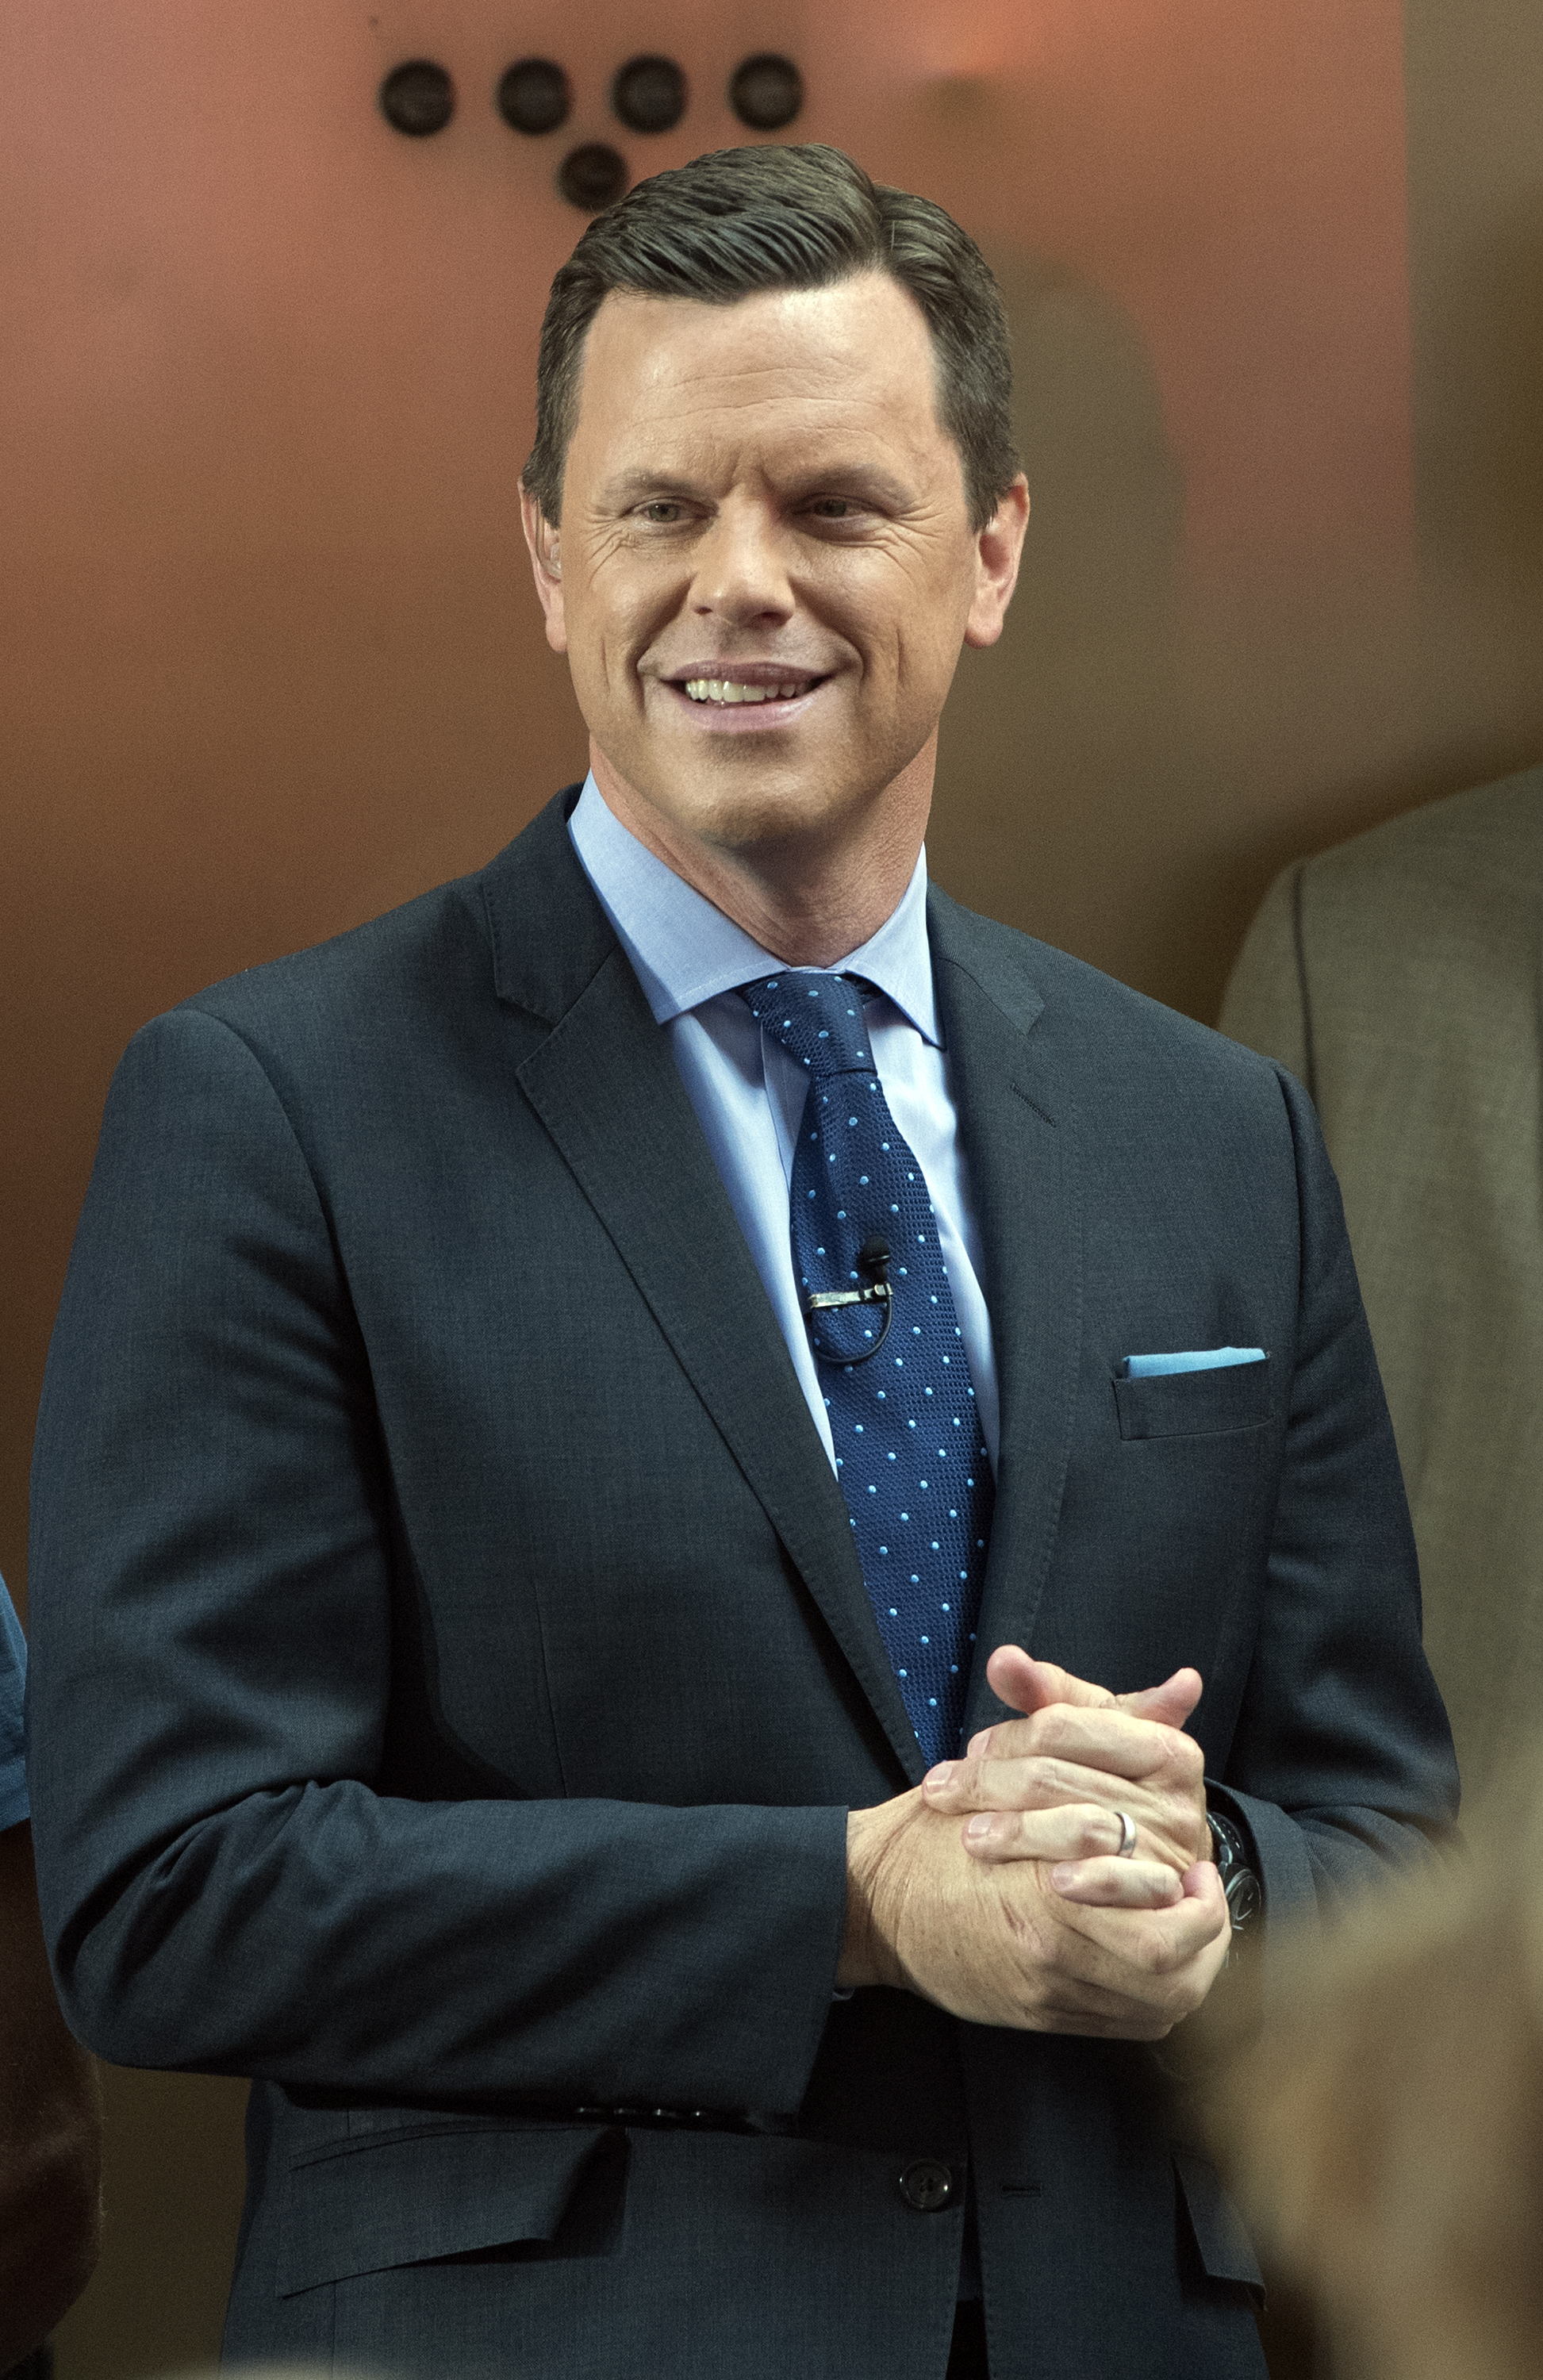 Willie Geist Steps in on Today